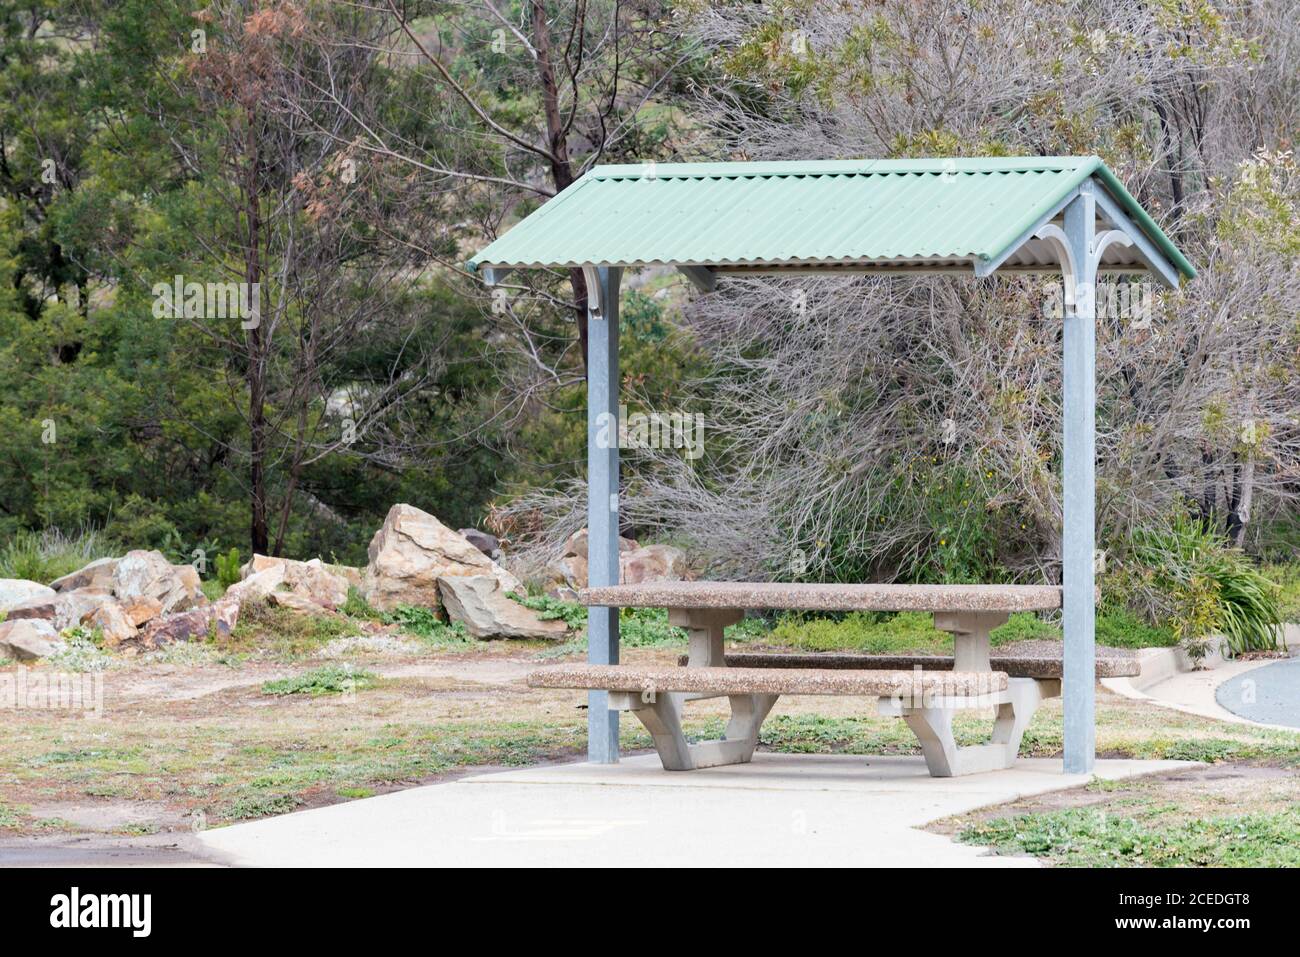 A post war modern or modernist design public picnic table and chair set near Lake George, New South Wales, Australia Stock Photo